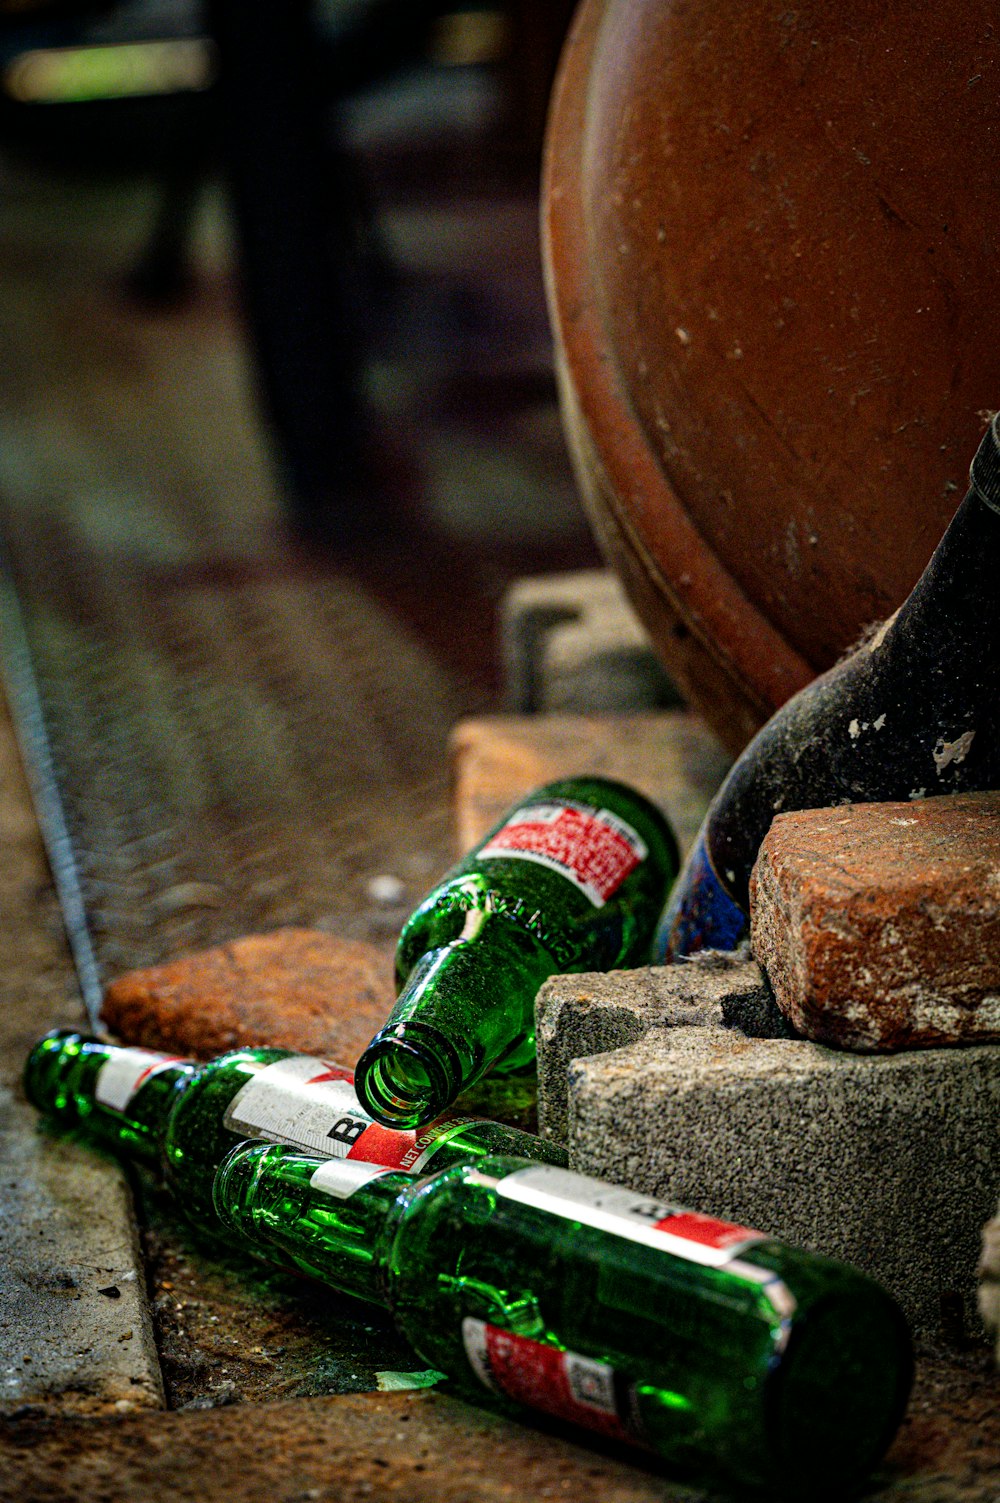 several empty beer bottles sitting on the ground